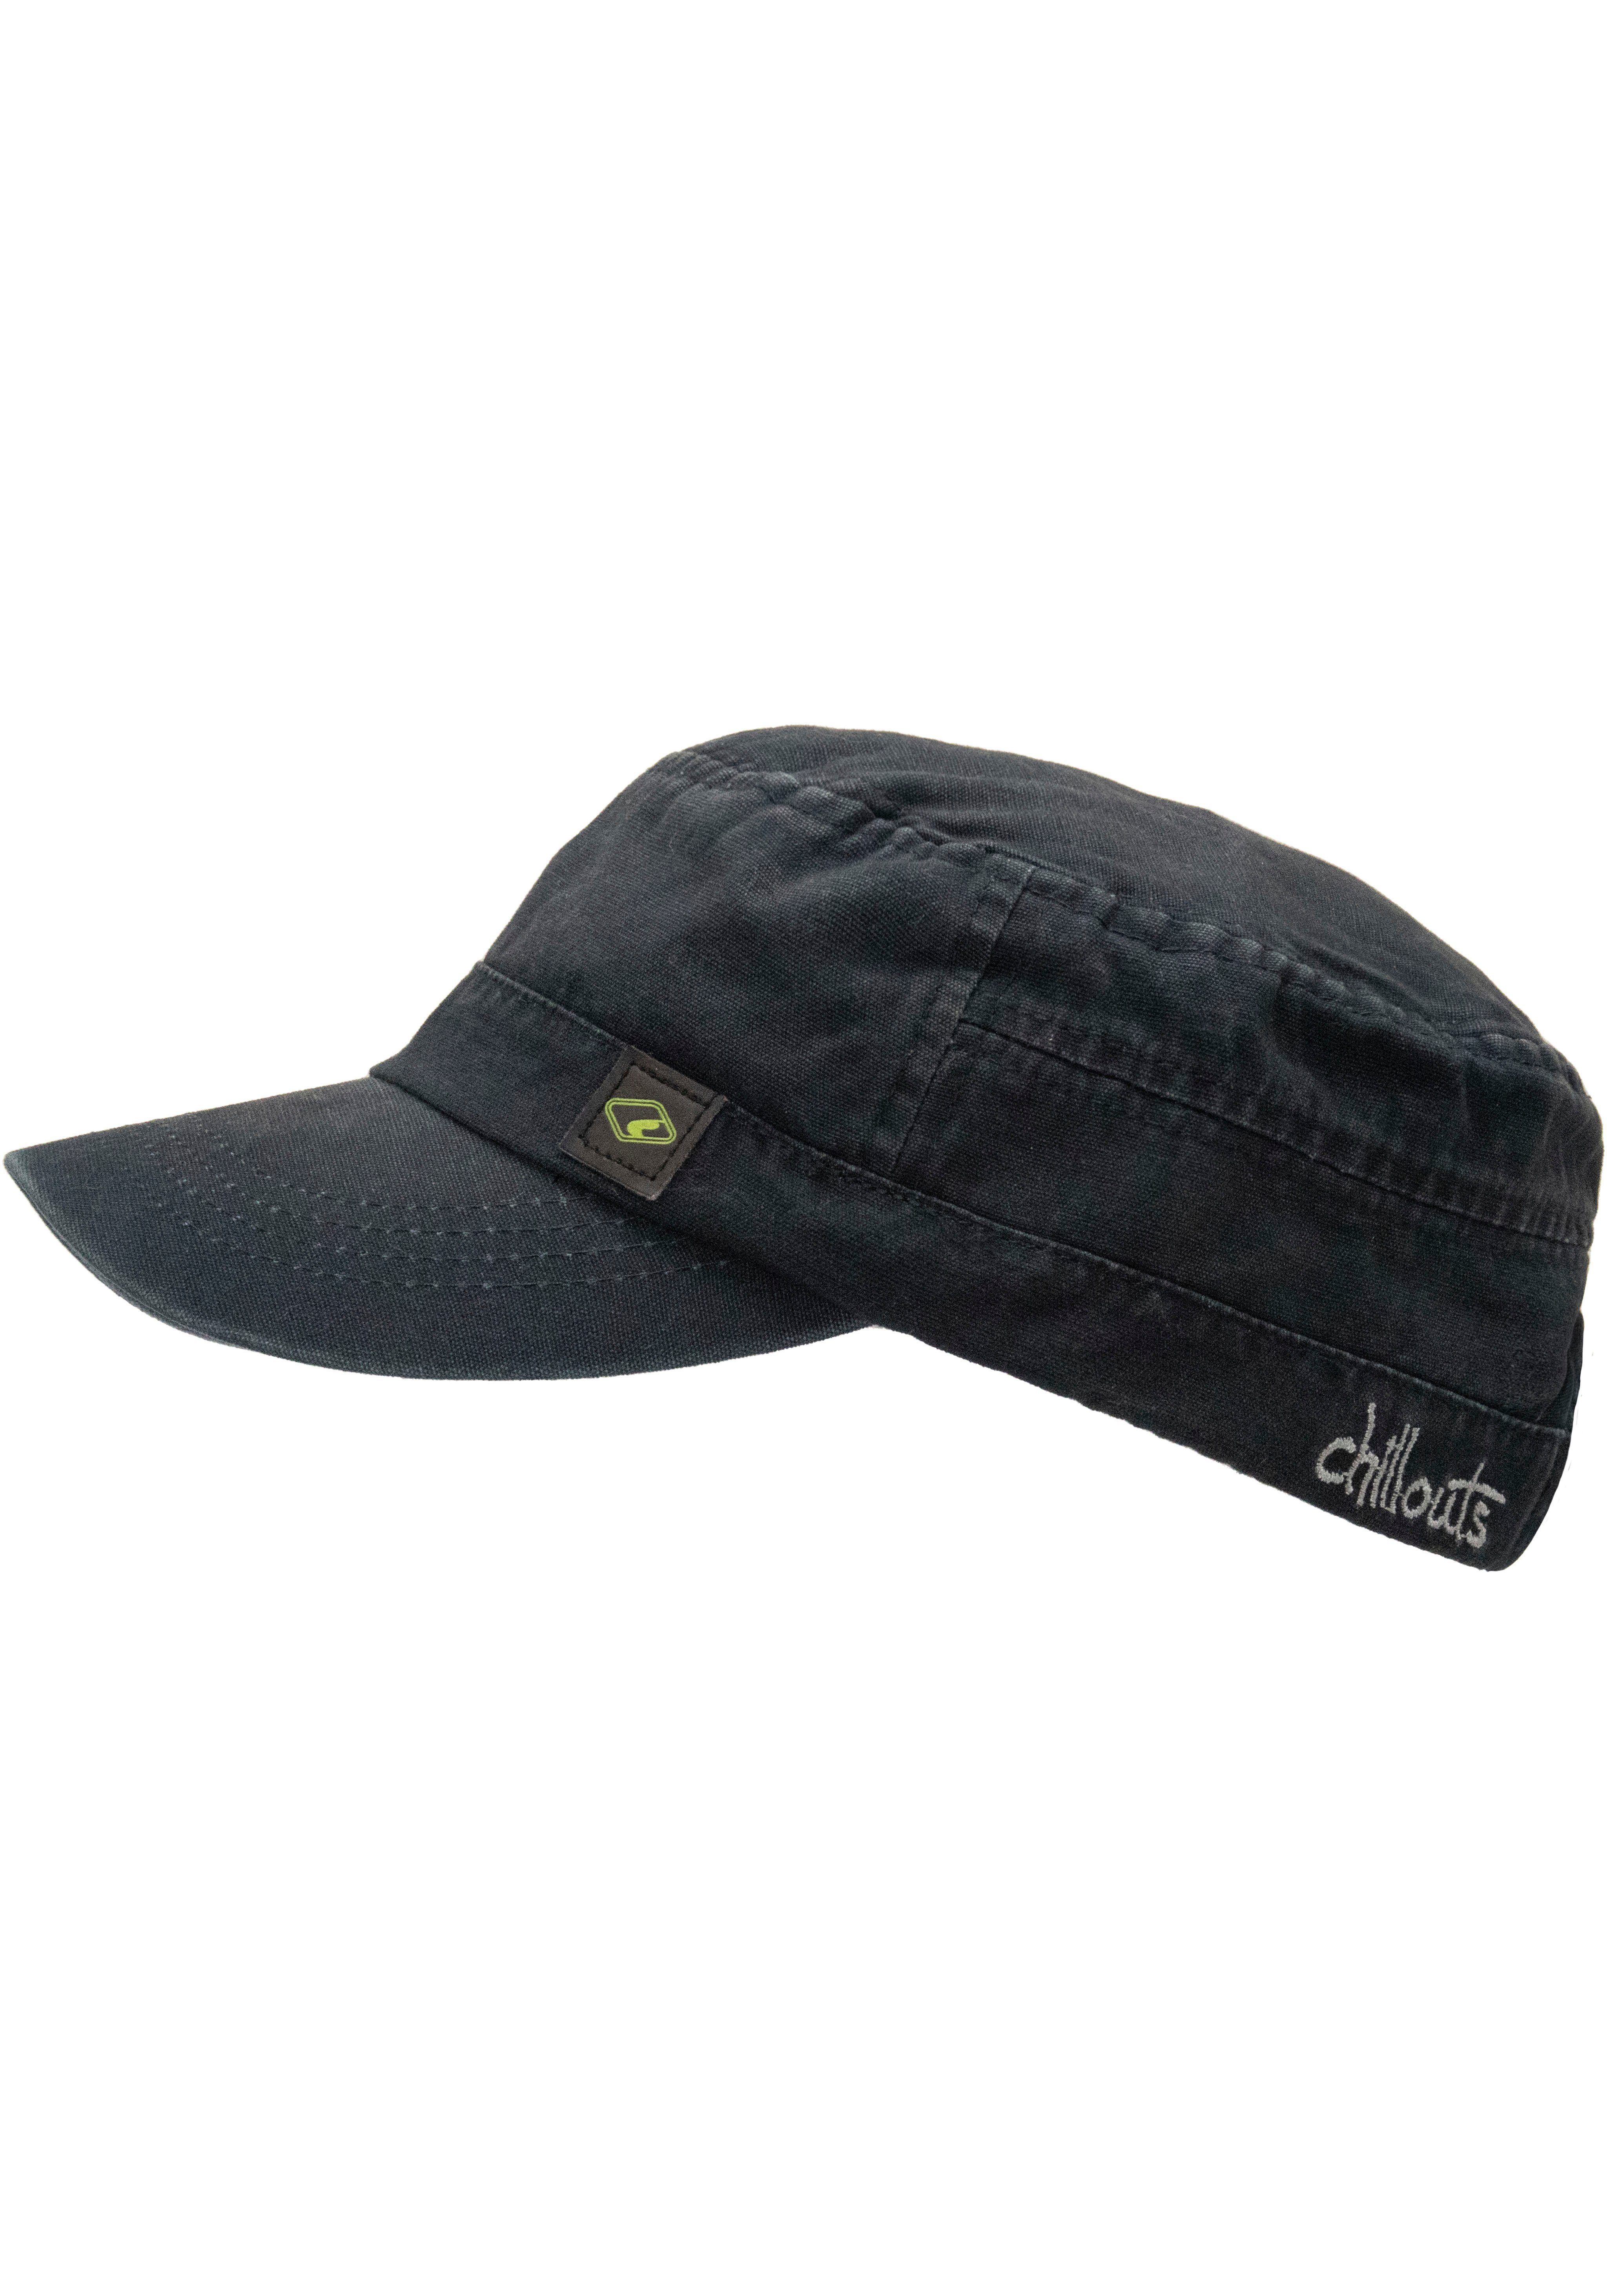 chillouts Army Cap El Paso aus navy Size Baumwolle, reiner Hat One atmungsaktiv, washed